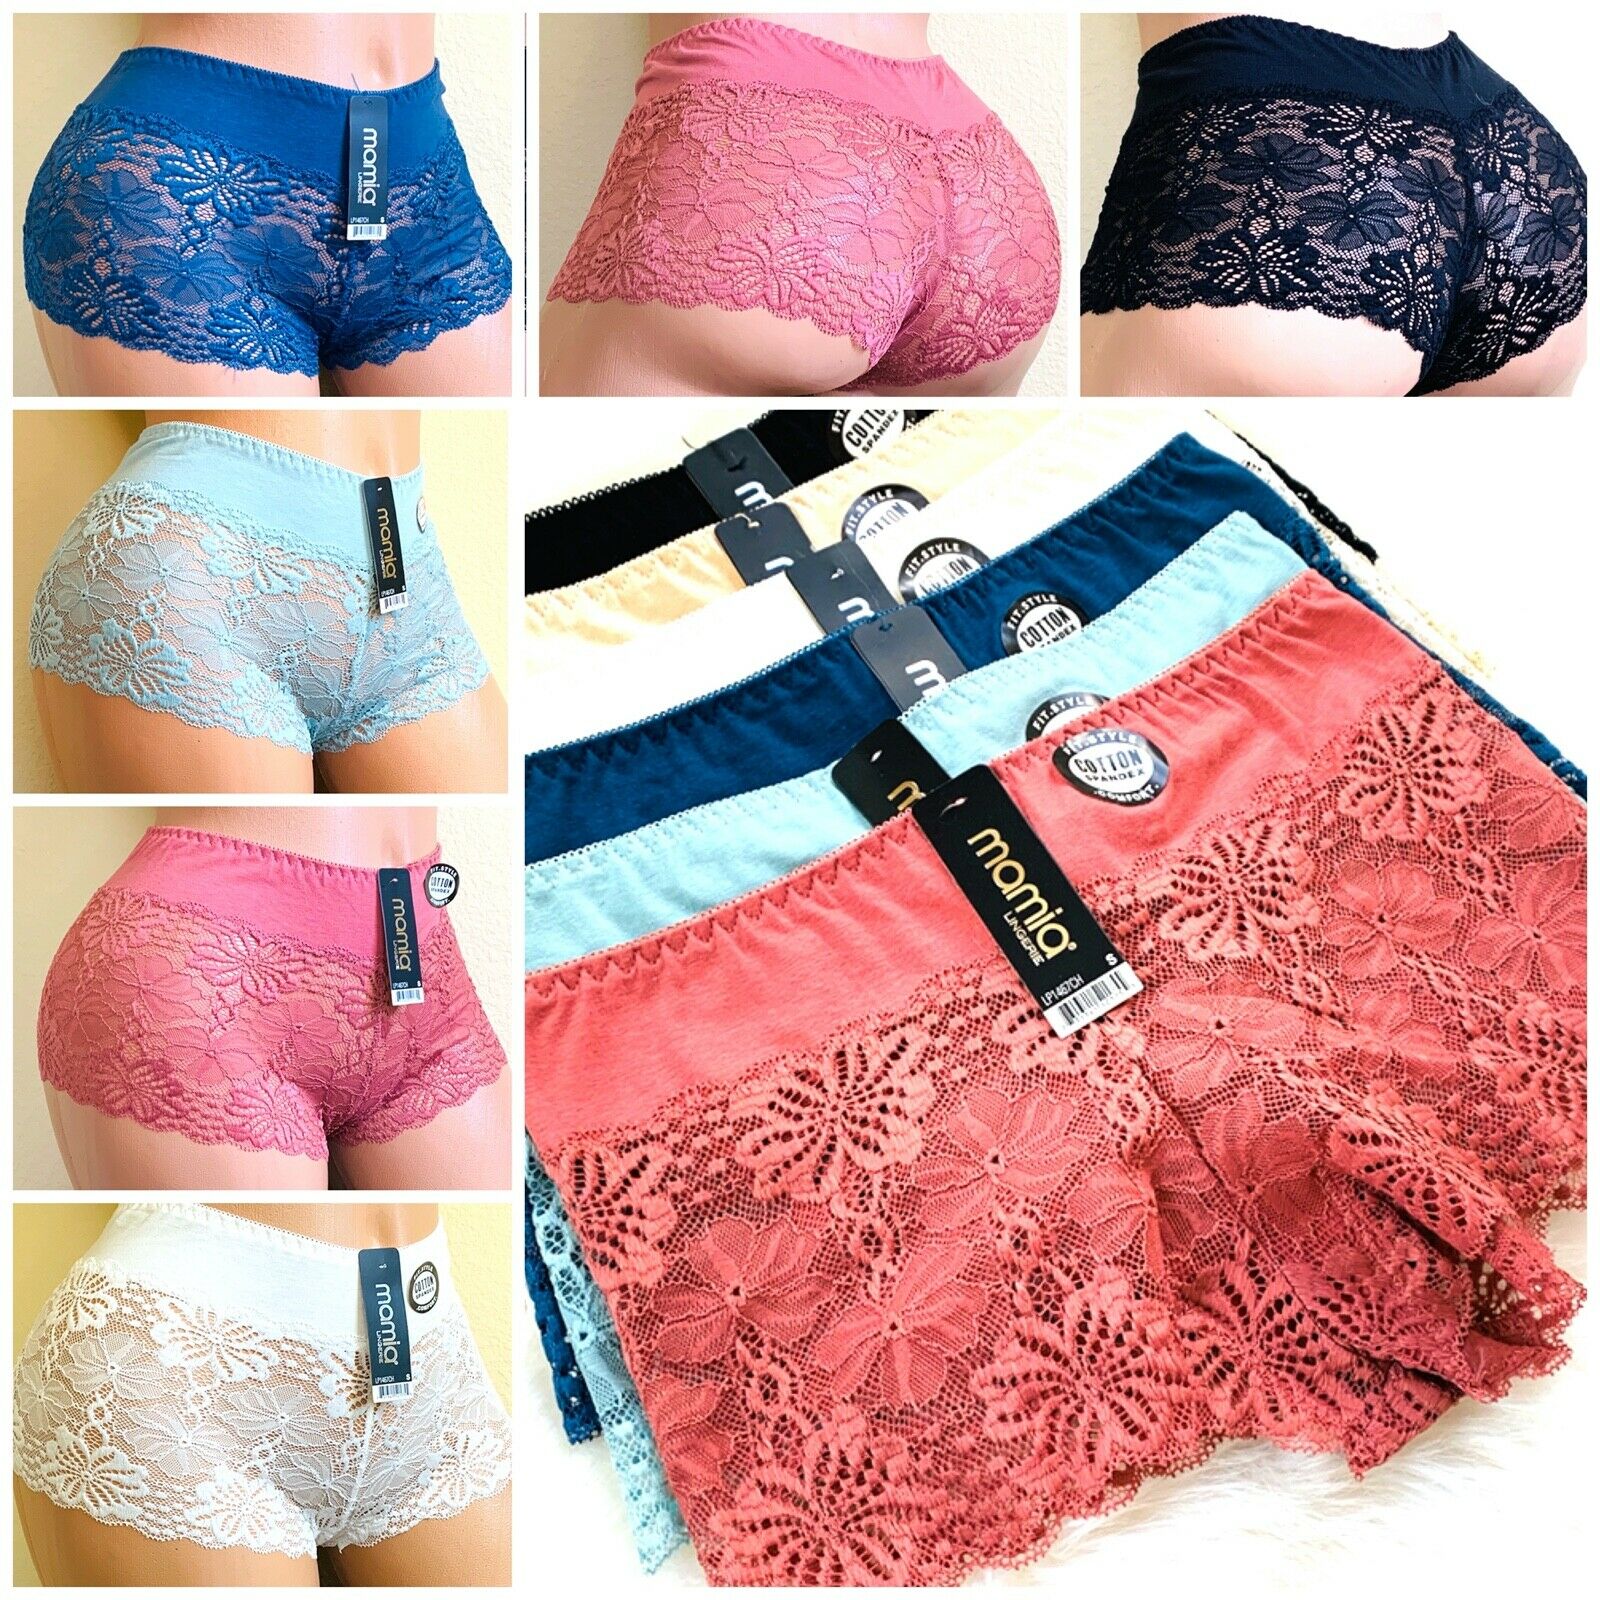 Boyshorts Lace Seamless Soft 6 Or 12 Multi-colors Panties Underwears L883 S-4xl